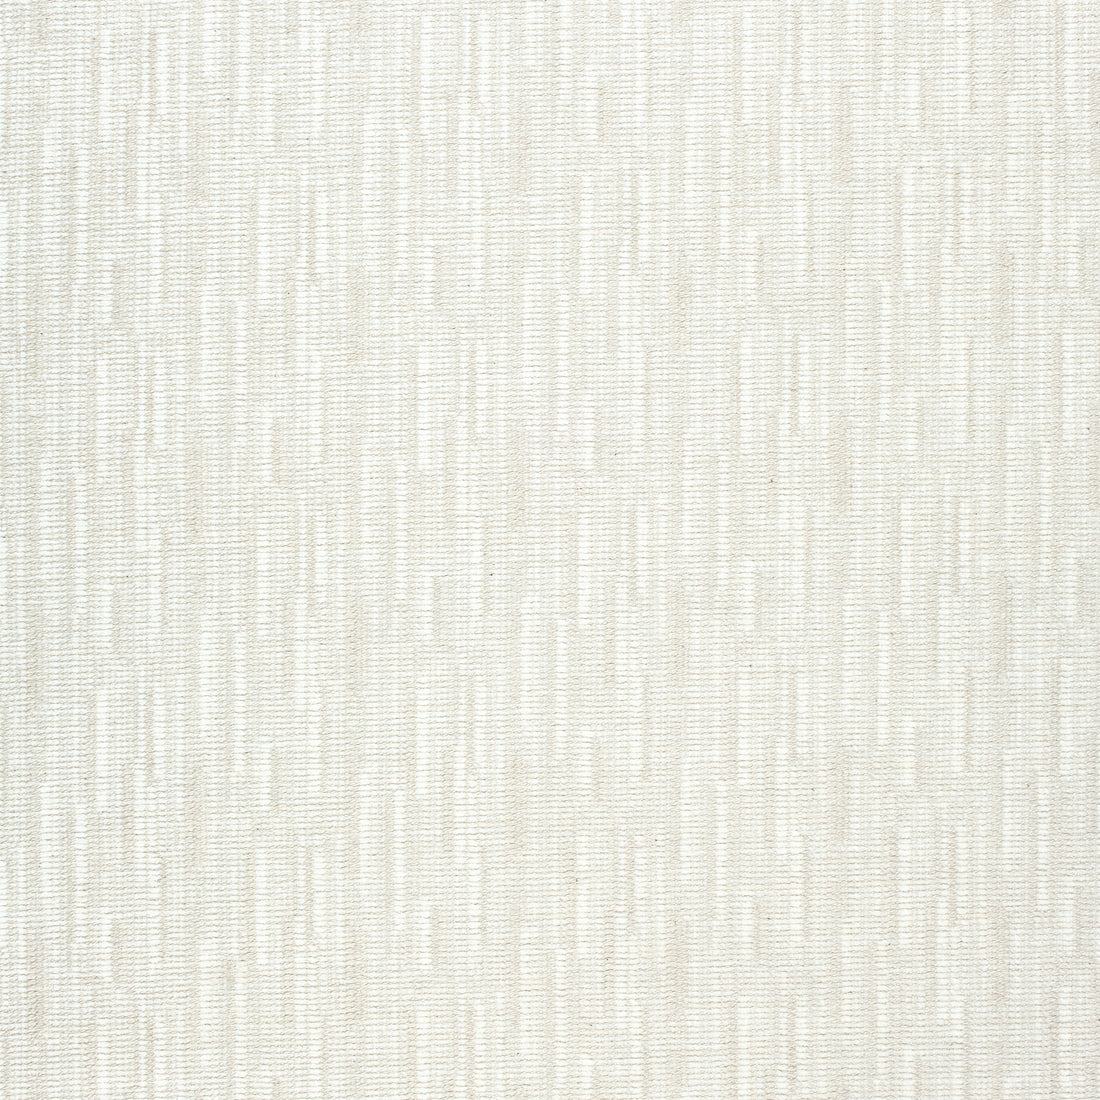 Dominic fabric in almond color - pattern number W789119 - by Thibaut in the Reverie collection